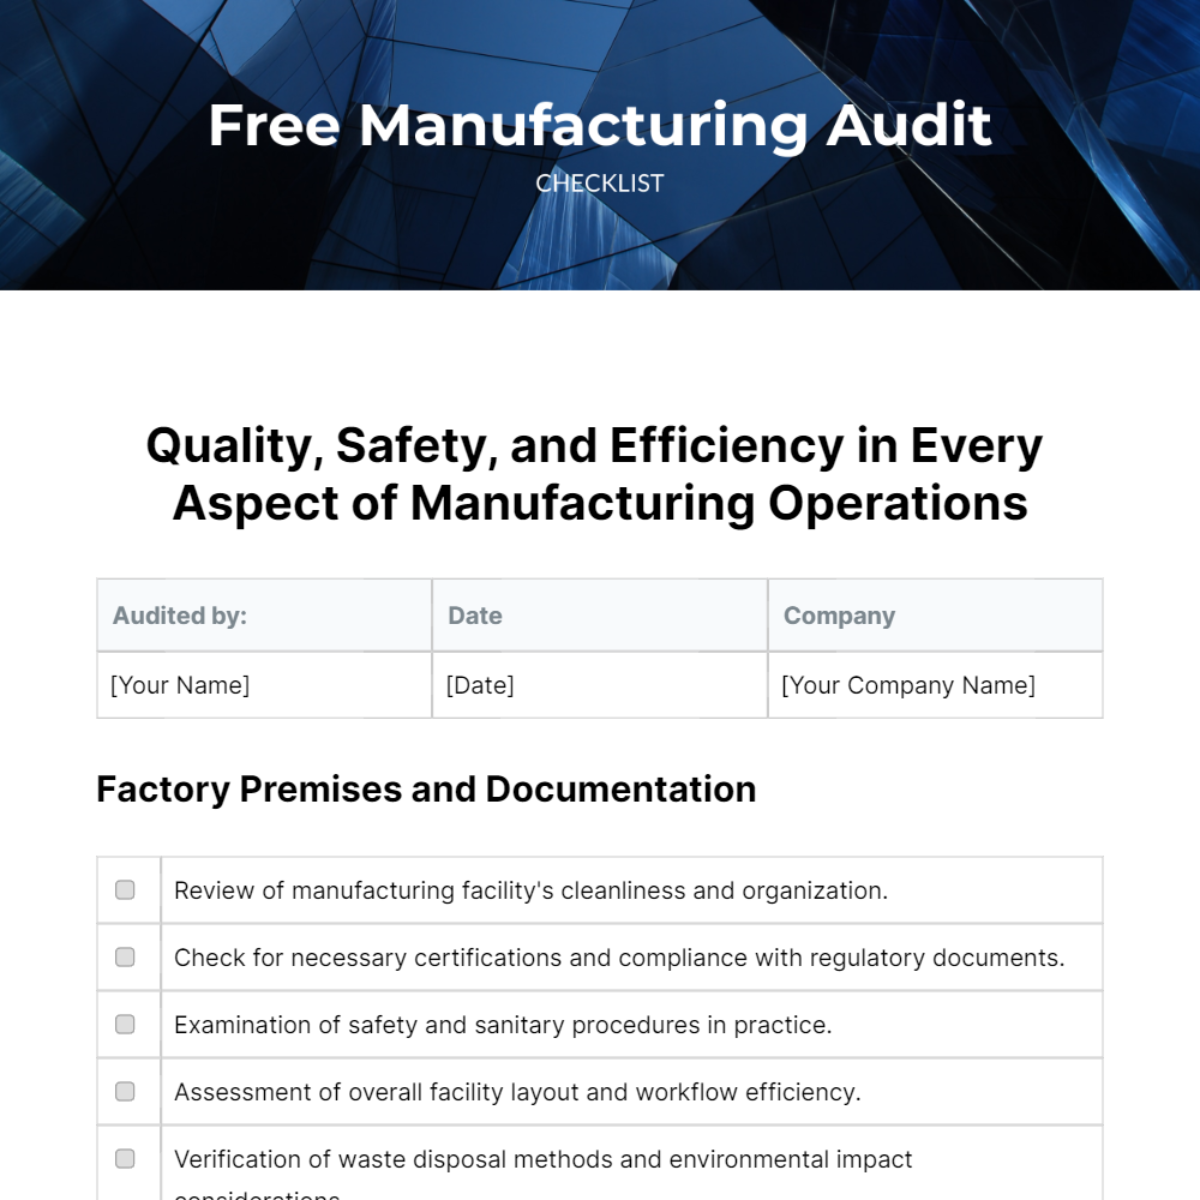 Free Manufacturing Audit Checklist Template